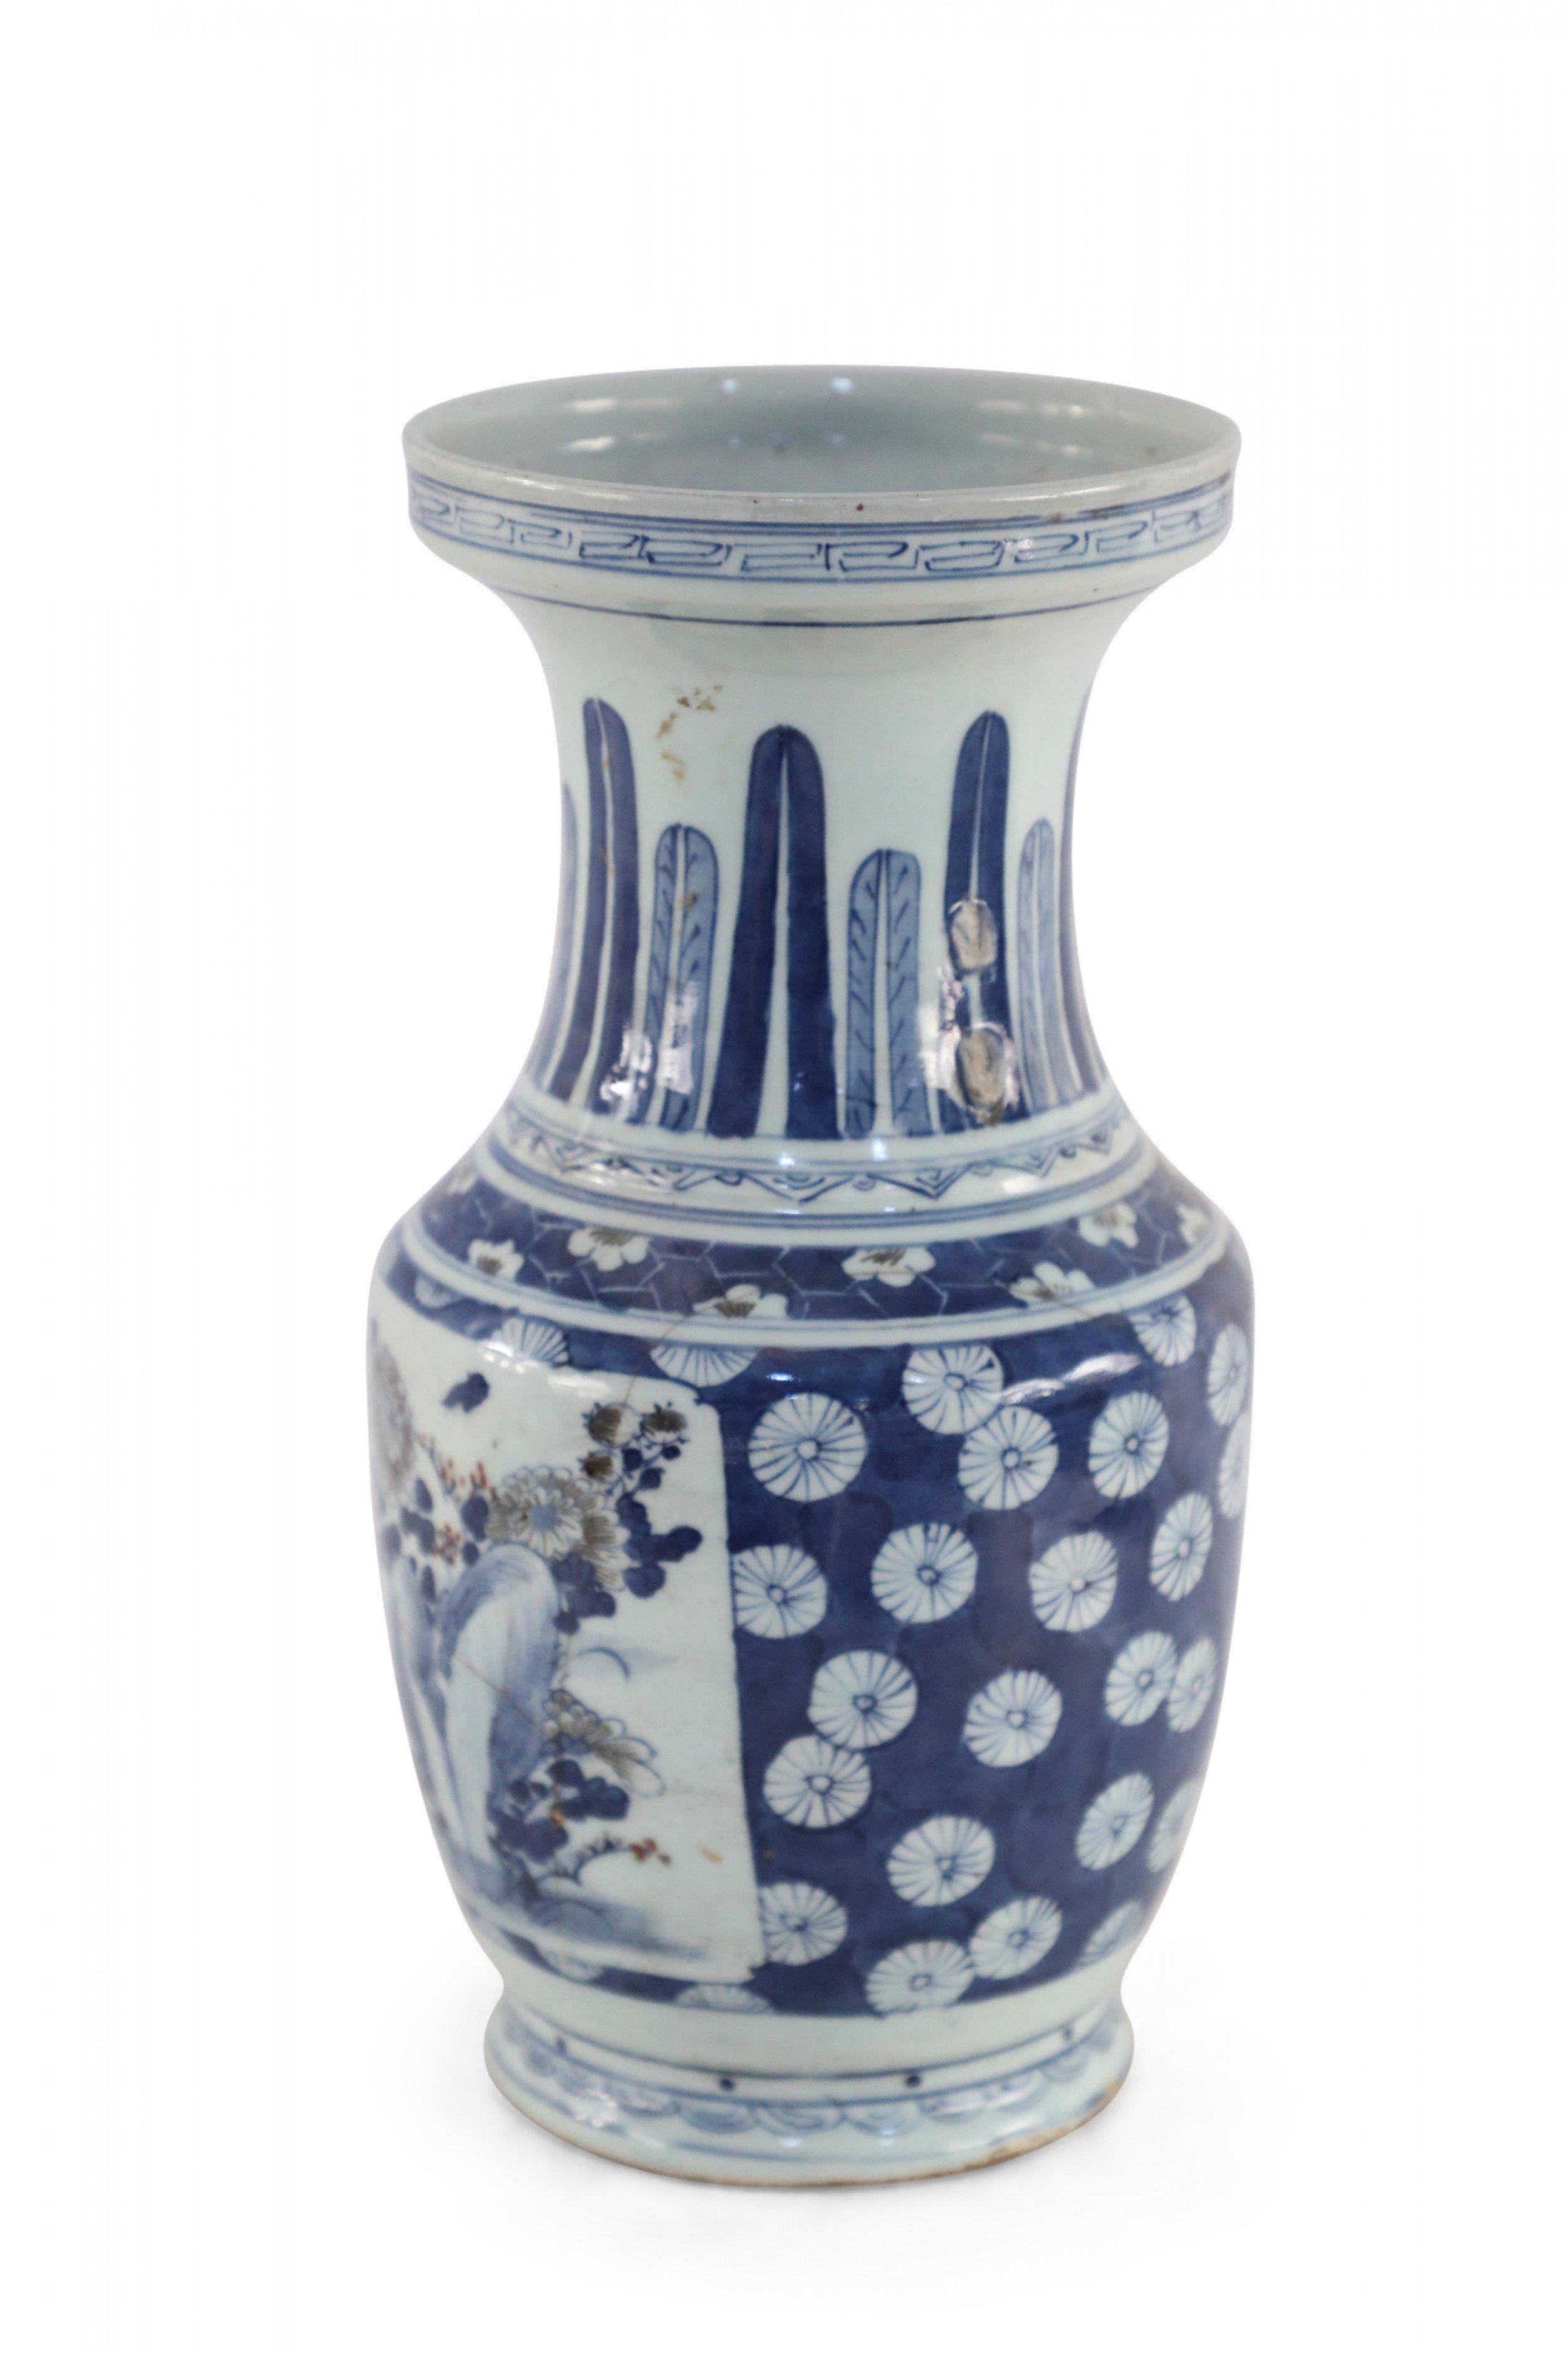 Chinese White and Blue Floral and Feather Motif Porcelain Urn For Sale 6